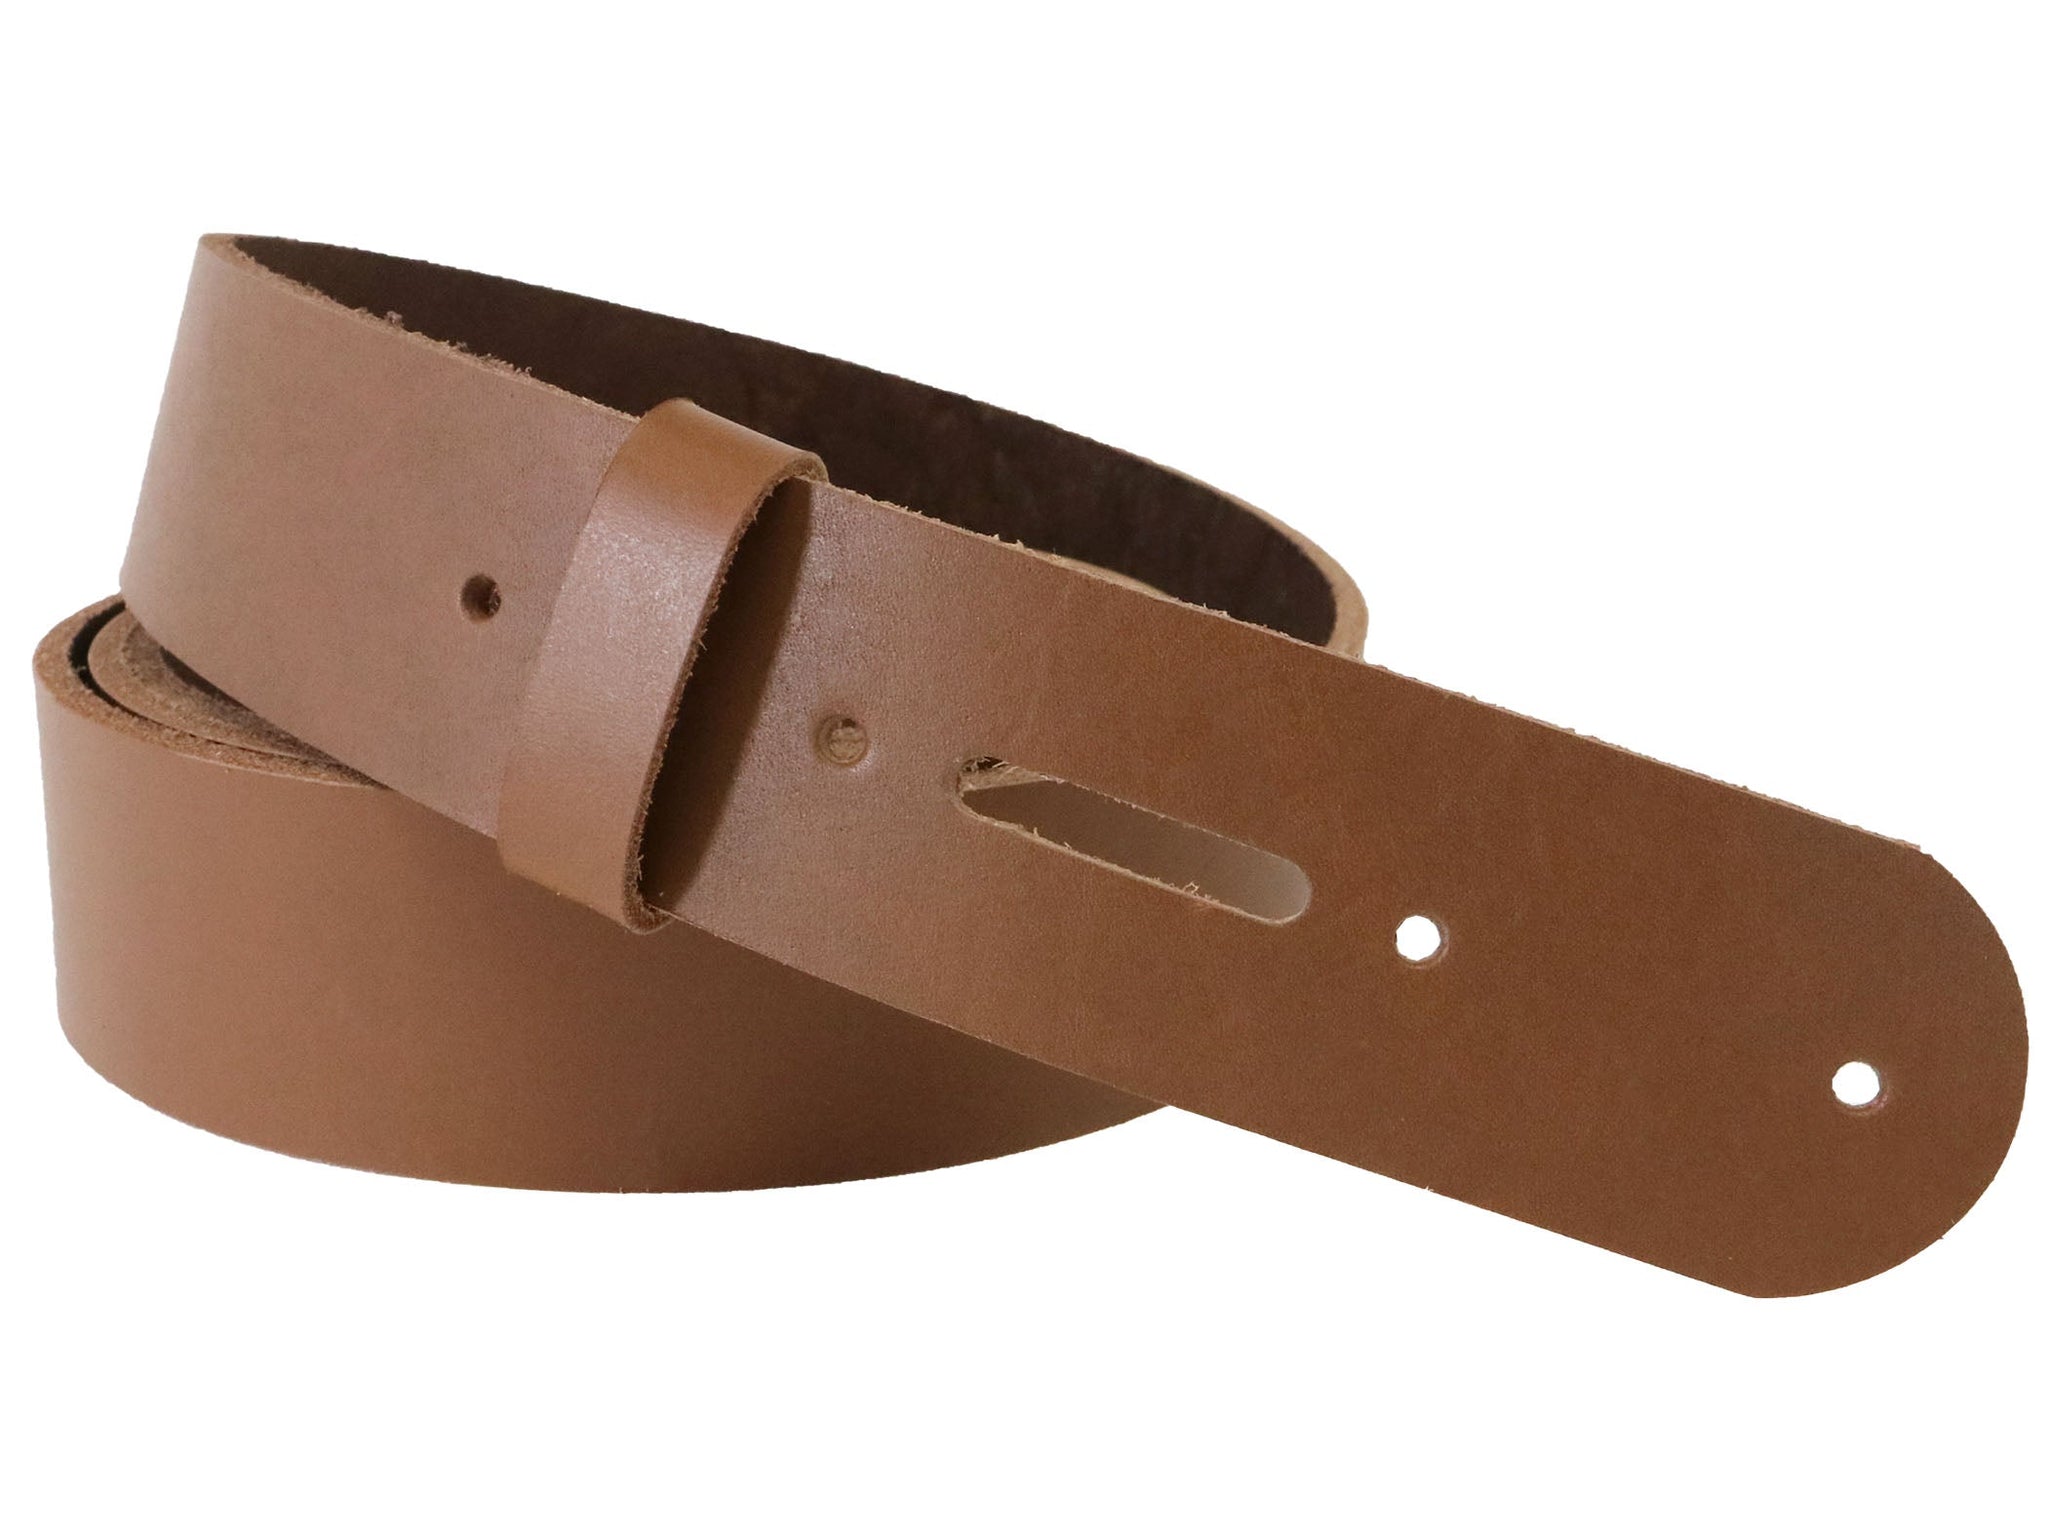 Brown Vegetable Tanned Leather Belt Blank w/ Matching Keeper